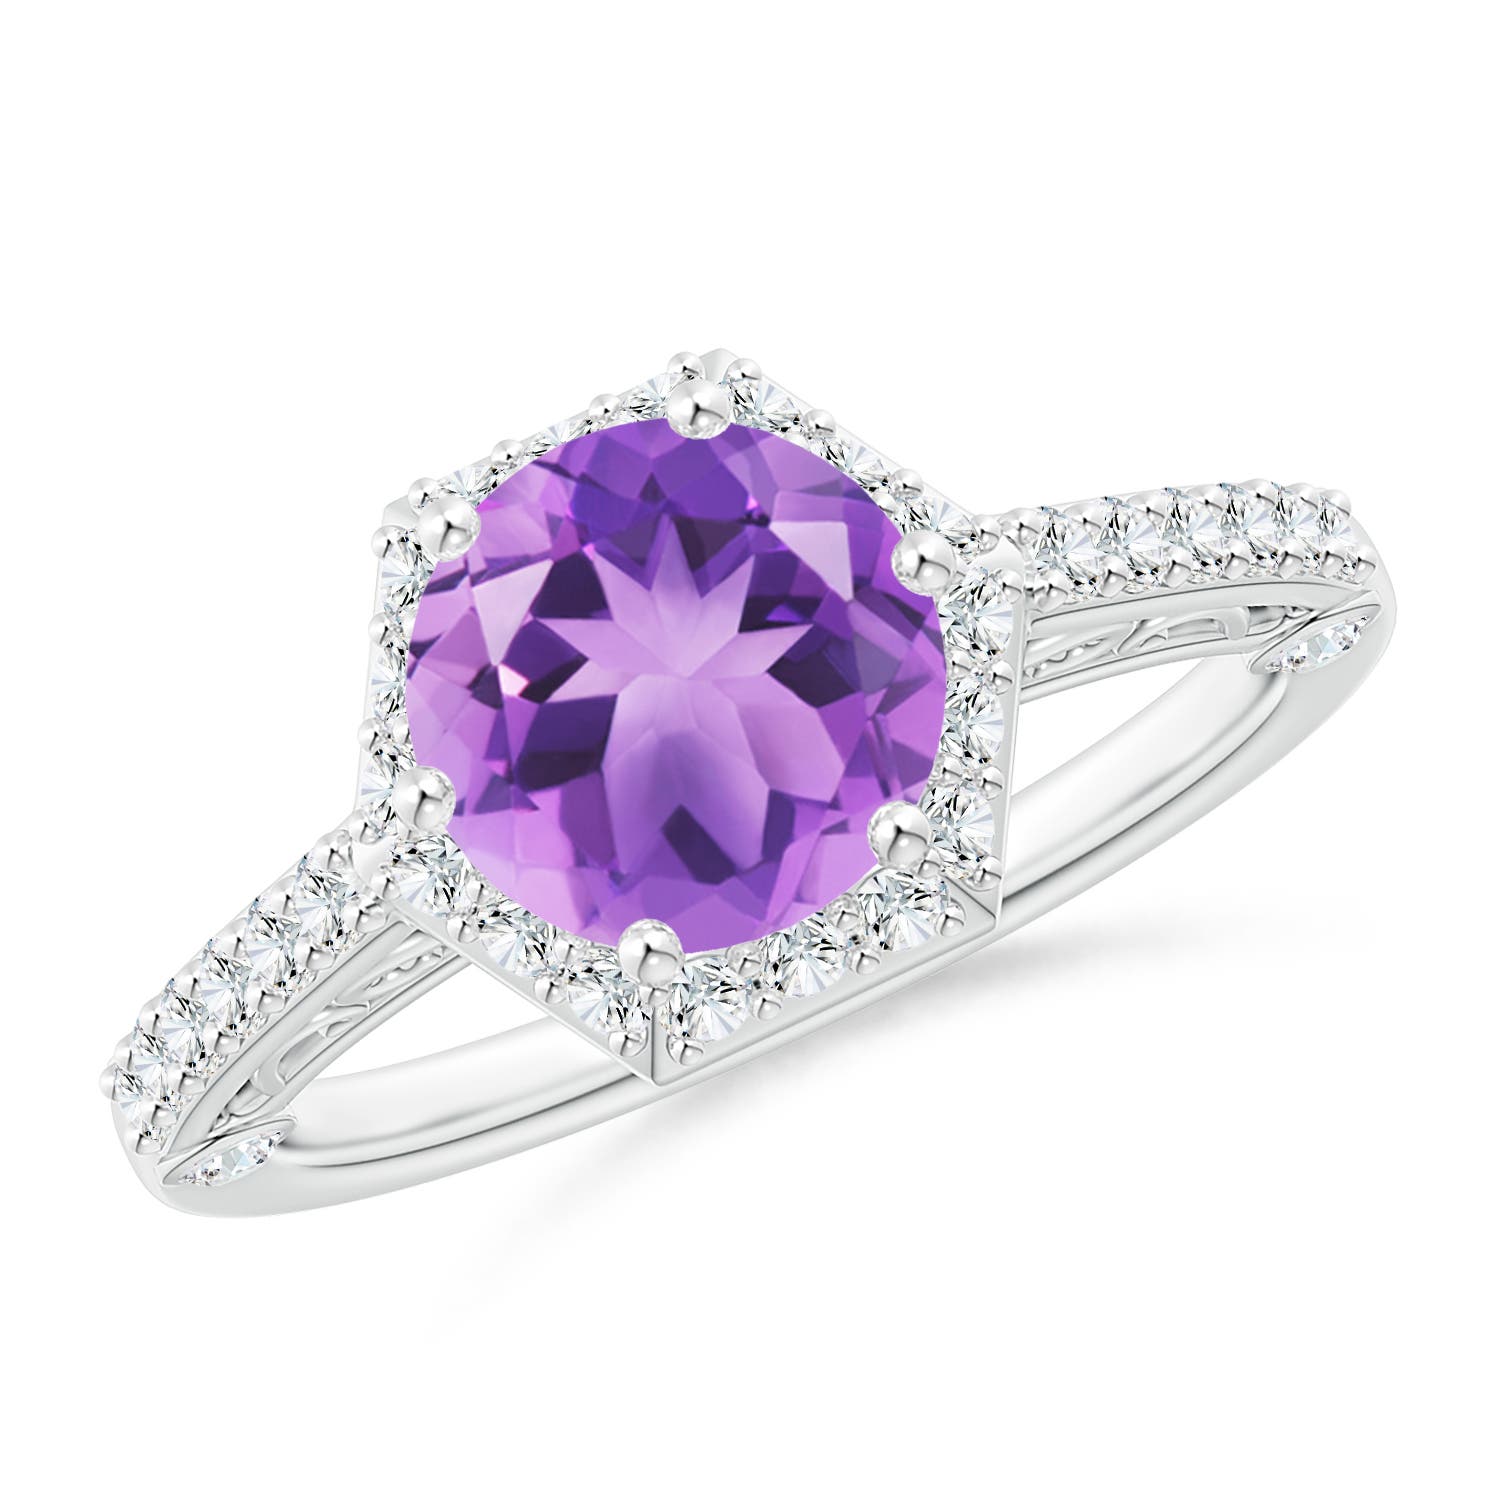 A - Amethyst / 2.14 CT / 14 KT White Gold